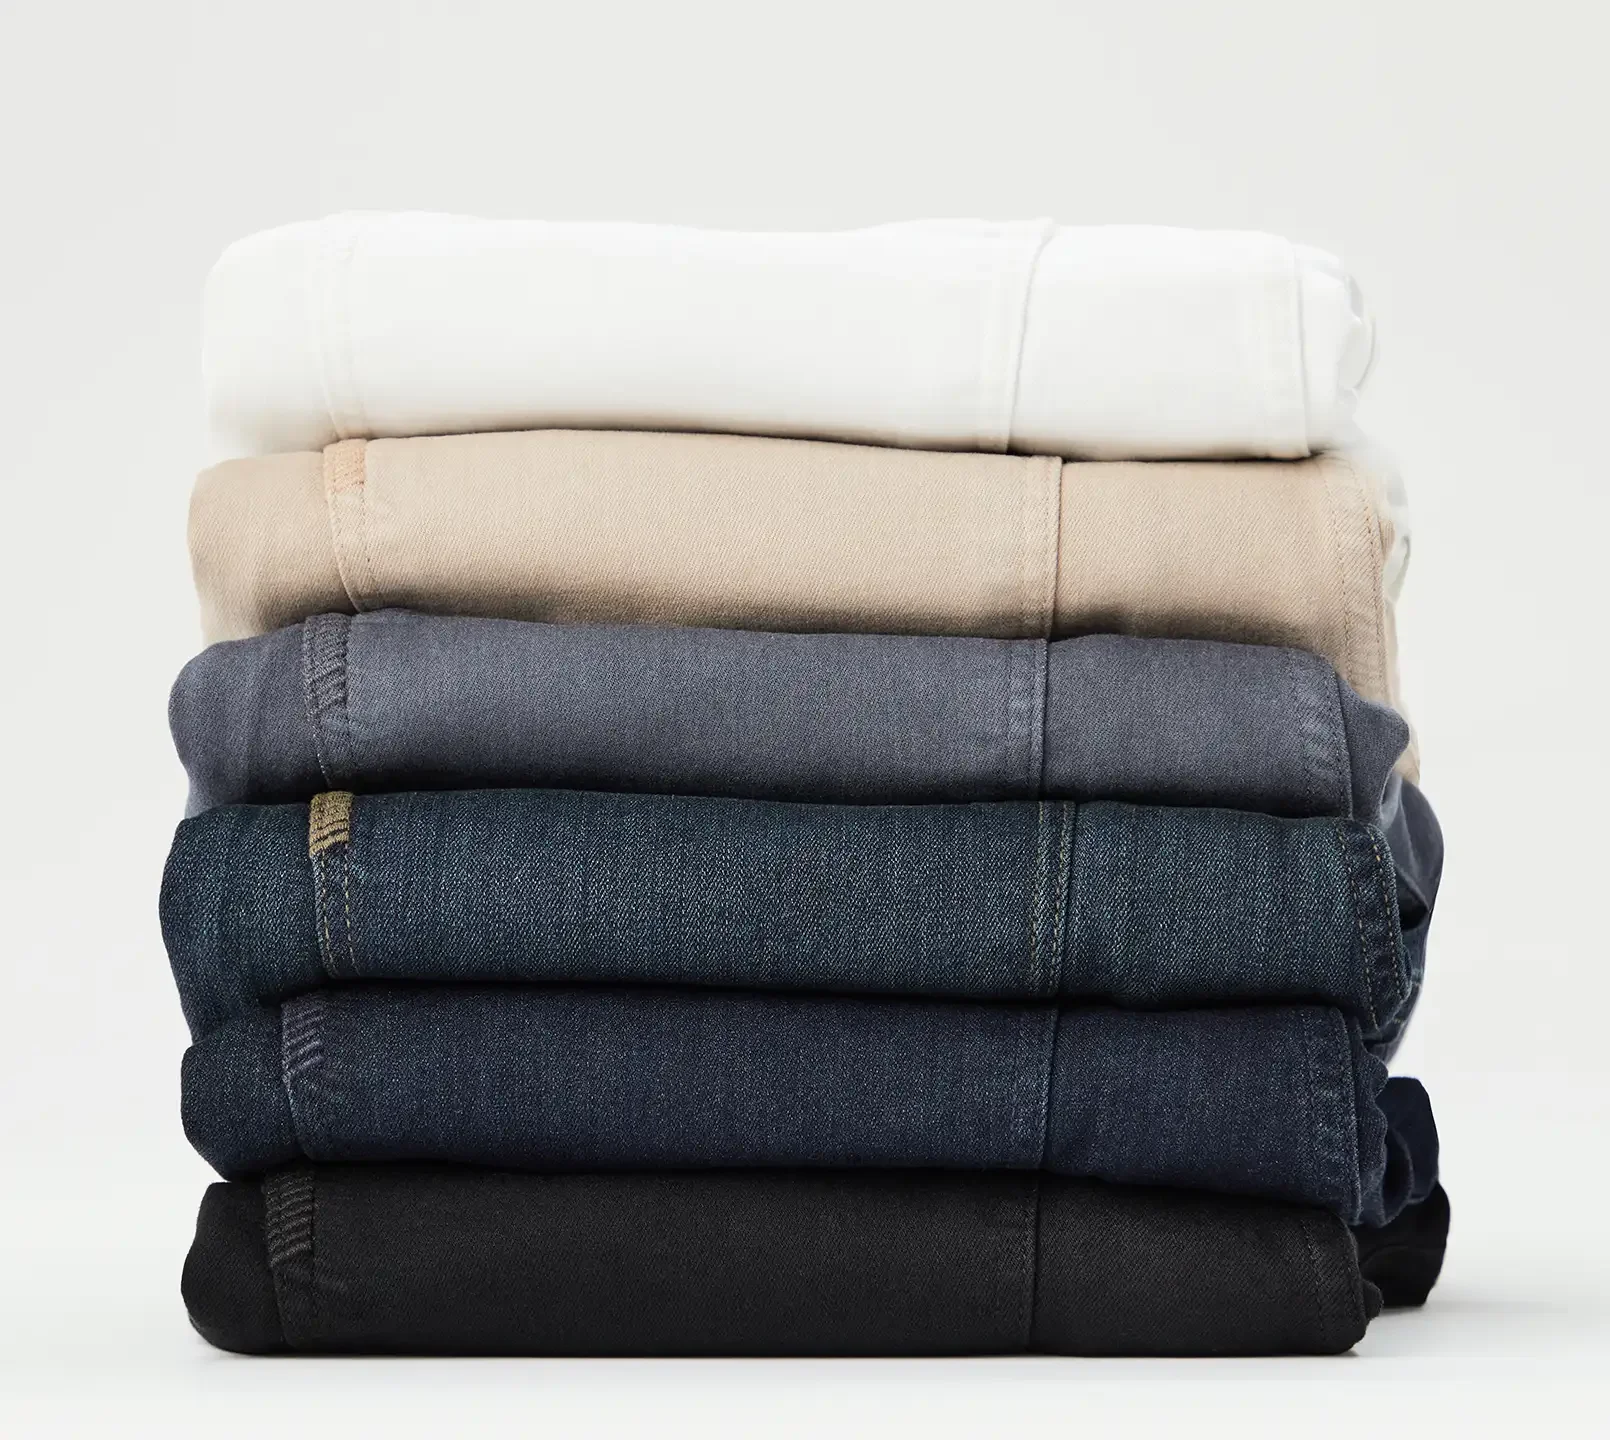 A stack of folded men's denim from lightest washes on top to darkest washes on bottom